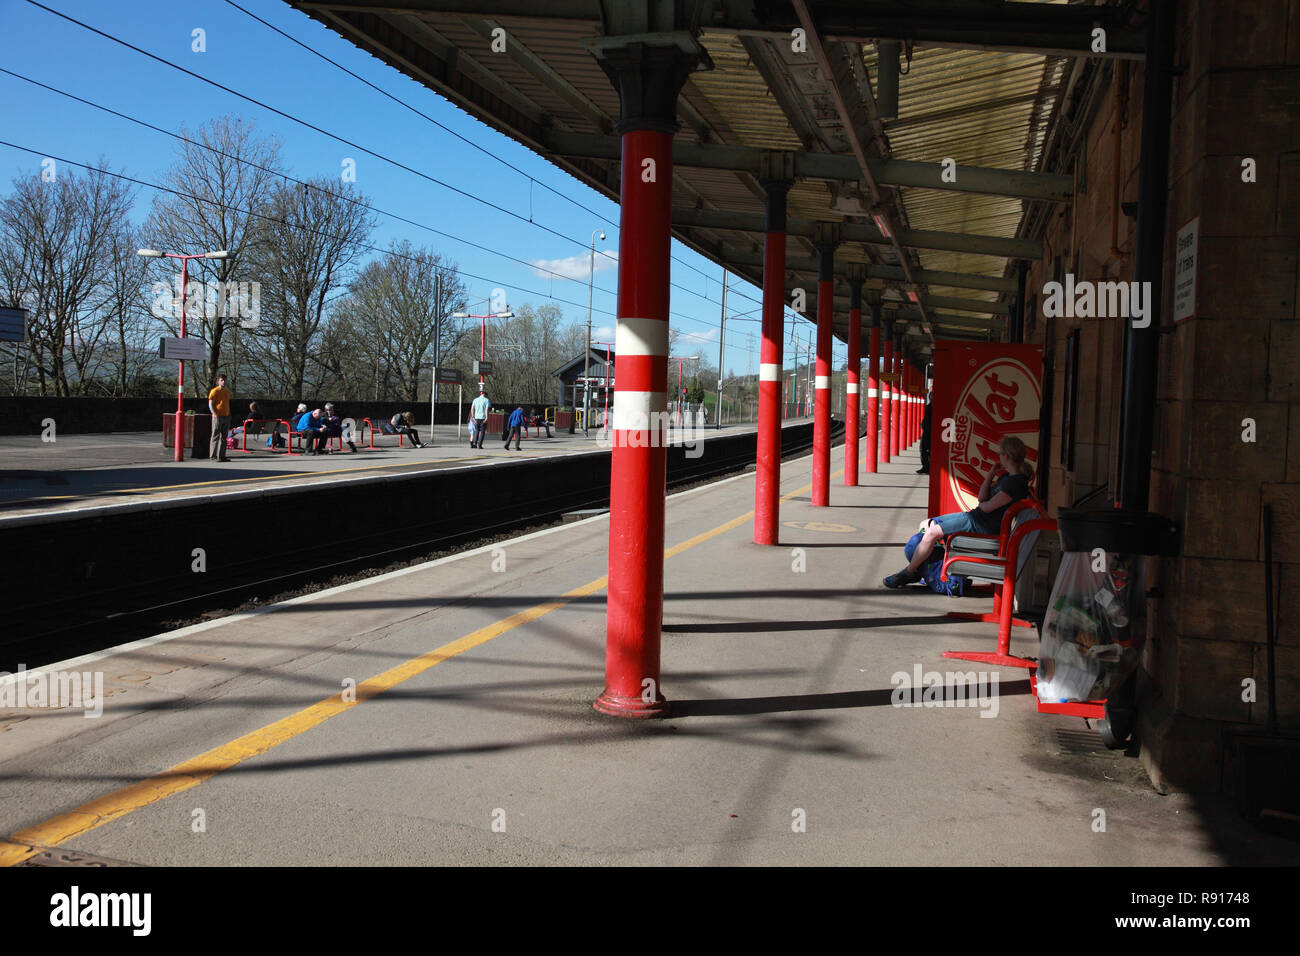 Platforms at Oxenholme station in the Lake District, Cumbria, northern England Stock Photo